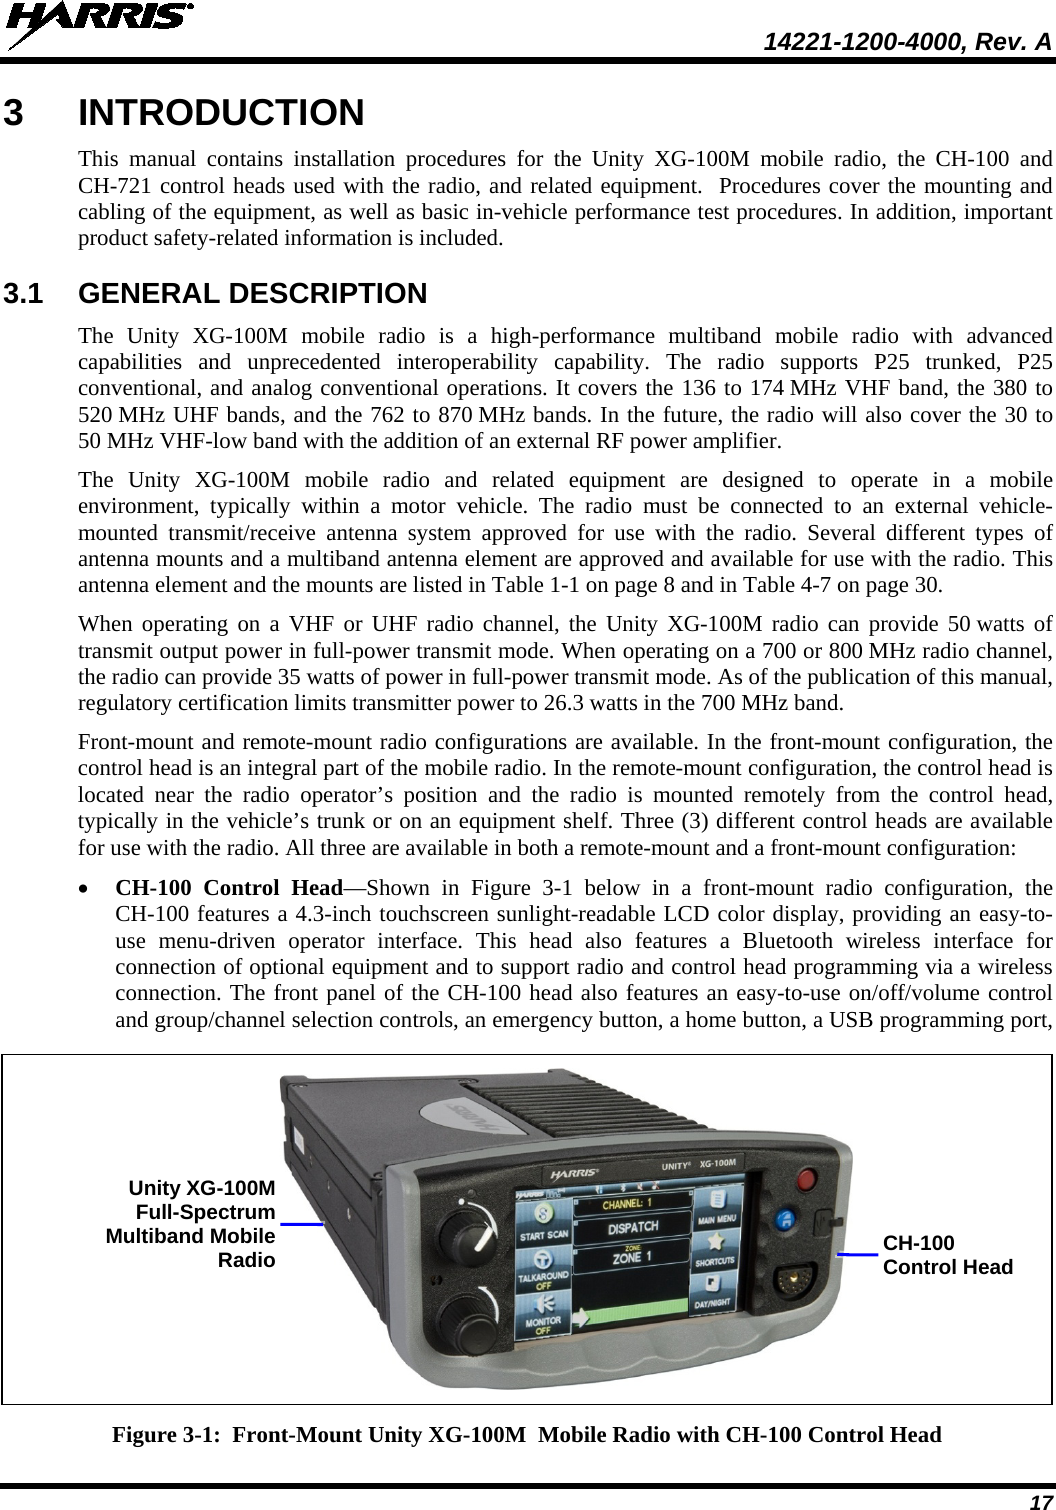  14221-1200-4000, Rev. A  17 3  INTRODUCTION This manual contains installation procedures for the Unity XG-100M mobile radio,  the  CH-100 and CH-721 control heads used with the radio, and related equipment.  Procedures cover the mounting and cabling of the equipment, as well as basic in-vehicle performance test procedures. In addition, important product safety-related information is included. 3.1 GENERAL DESCRIPTION The  Unity XG-100M mobile radio is a high-performance  multiband  mobile radio with advanced capabilities and unprecedented interoperability capability.  The radio supports  P25 trunked, P25 conventional, and analog conventional operations. It covers the 136 to 174 MHz VHF band, the 380 to 520 MHz UHF bands, and the 762 to 870 MHz bands. In the future, the radio will also cover the 30 to 50 MHz VHF-low band with the addition of an external RF power amplifier. The  Unity XG-100M mobile radio and related equipment are designed to operate in a mobile environment, typically within a motor vehicle. The radio must be connected to an external vehicle-mounted  transmit/receive antenna system approved for use with the radio. Several different types of antenna mounts and a multiband antenna element are approved and available for use with the radio. This antenna element and the mounts are listed in Table 1-1 on page 8 and in Table 4-7 on page 30. When operating on a VHF or UHF radio channel, the Unity XG-100M radio can provide 50 watts of transmit output power in full-power transmit mode. When operating on a 700 or 800 MHz radio channel, the radio can provide 35 watts of power in full-power transmit mode. As of the publication of this manual, regulatory certification limits transmitter power to 26.3 watts in the 700 MHz band. Front-mount and remote-mount radio configurations are available. In the front-mount configuration, the control head is an integral part of the mobile radio. In the remote-mount configuration, the control head is located near the radio operator’s position and the radio is mounted remotely from the control head, typically in the vehicle’s trunk or on an equipment shelf. Three (3) different control heads are available for use with the radio. All three are available in both a remote-mount and a front-mount configuration: • CH-100 Control Head—Shown in Figure  3-1  below in a front-mount  radio  configuration, the CH-100 features a 4.3-inch touchscreen sunlight-readable LCD color display, providing an easy-to-use menu-driven operator interface. This head also features a Bluetooth wireless interface for connection of optional equipment and to support radio and control head programming via a wireless connection. The front panel of the CH-100 head also features an easy-to-use on/off/volume control and group/channel selection controls, an emergency button, a home button, a USB programming port,  Figure 3-1:  Front-Mount Unity XG-100M  Mobile Radio with CH-100 Control Head CH-100 Control Head Unity XG-100M Full-Spectrum Multiband Mobile Radio 